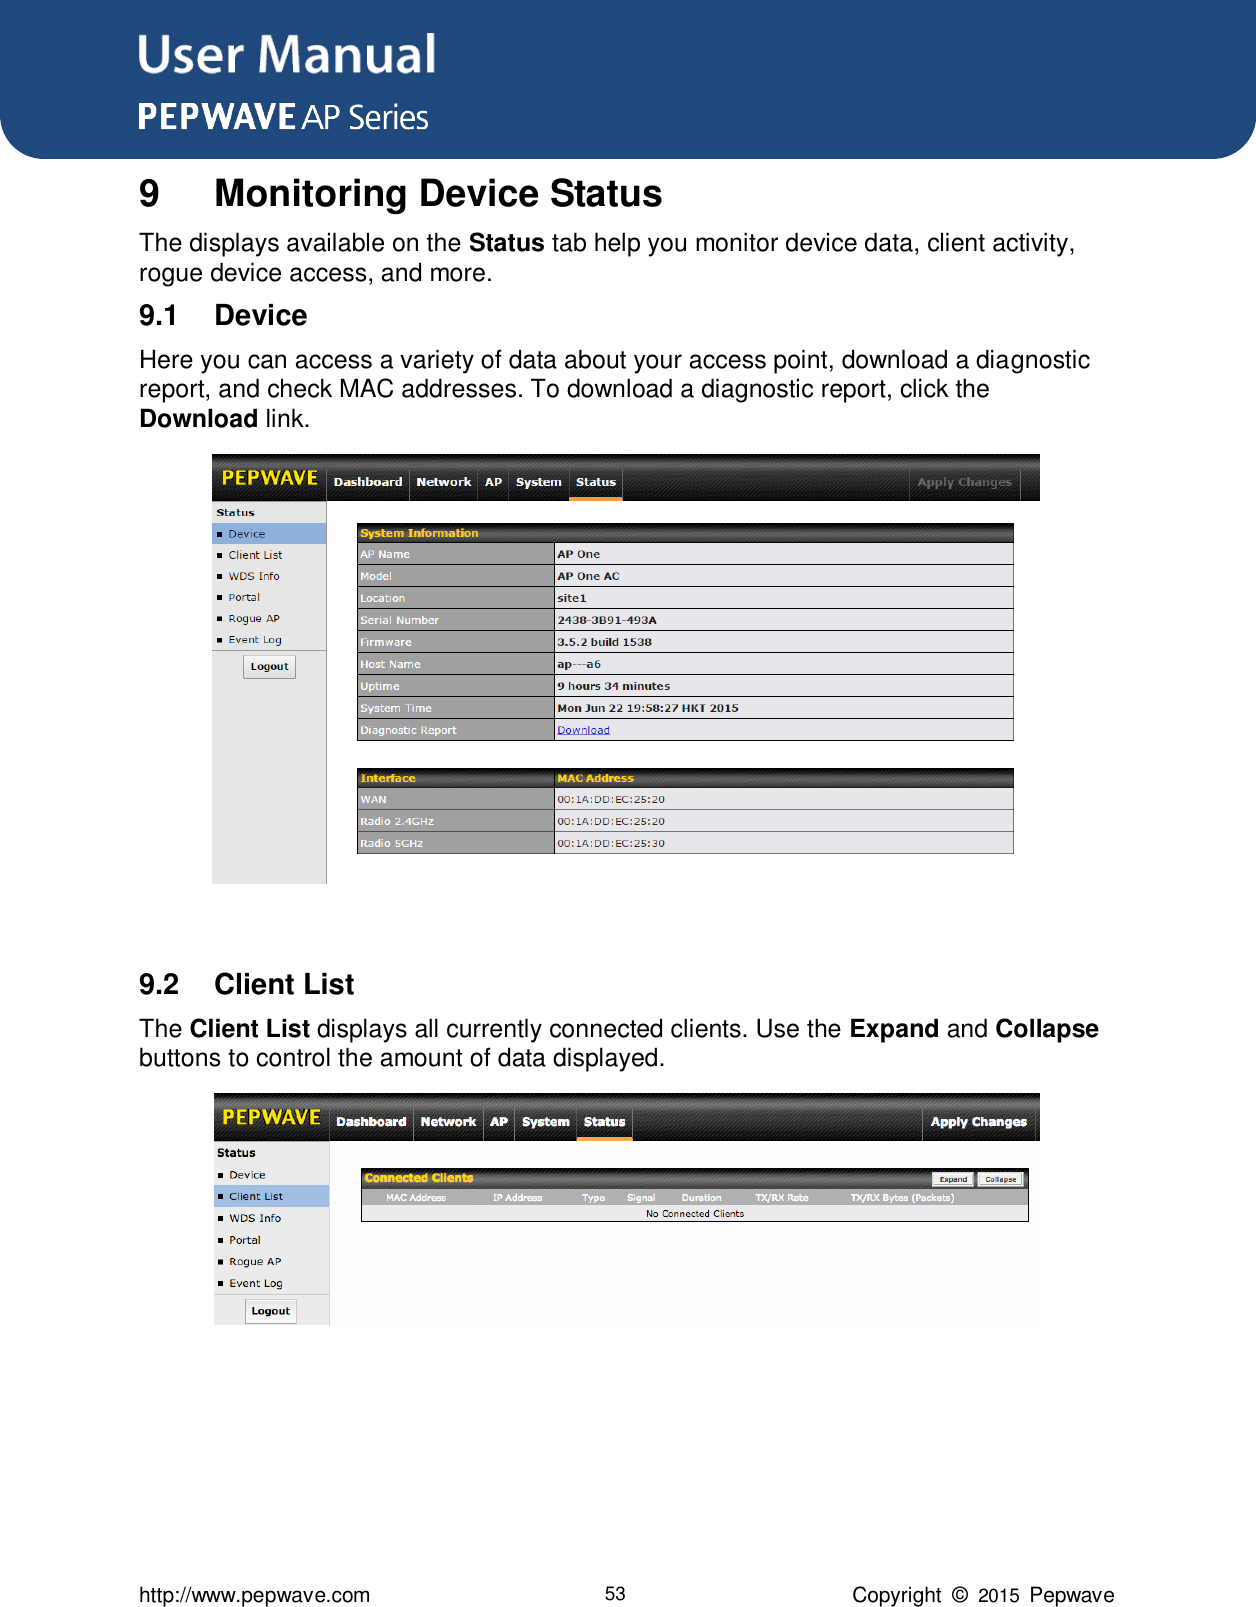 User Manual      http://www.pepwave.com 53 Copyright  ©  2015  Pepwave 9  Monitoring Device Status The displays available on the Status tab help you monitor device data, client activity, rogue device access, and more. 9.1  Device Here you can access a variety of data about your access point, download a diagnostic report, and check MAC addresses. To download a diagnostic report, click the Download link.   9.2  Client List The Client List displays all currently connected clients. Use the Expand and Collapse buttons to control the amount of data displayed.      